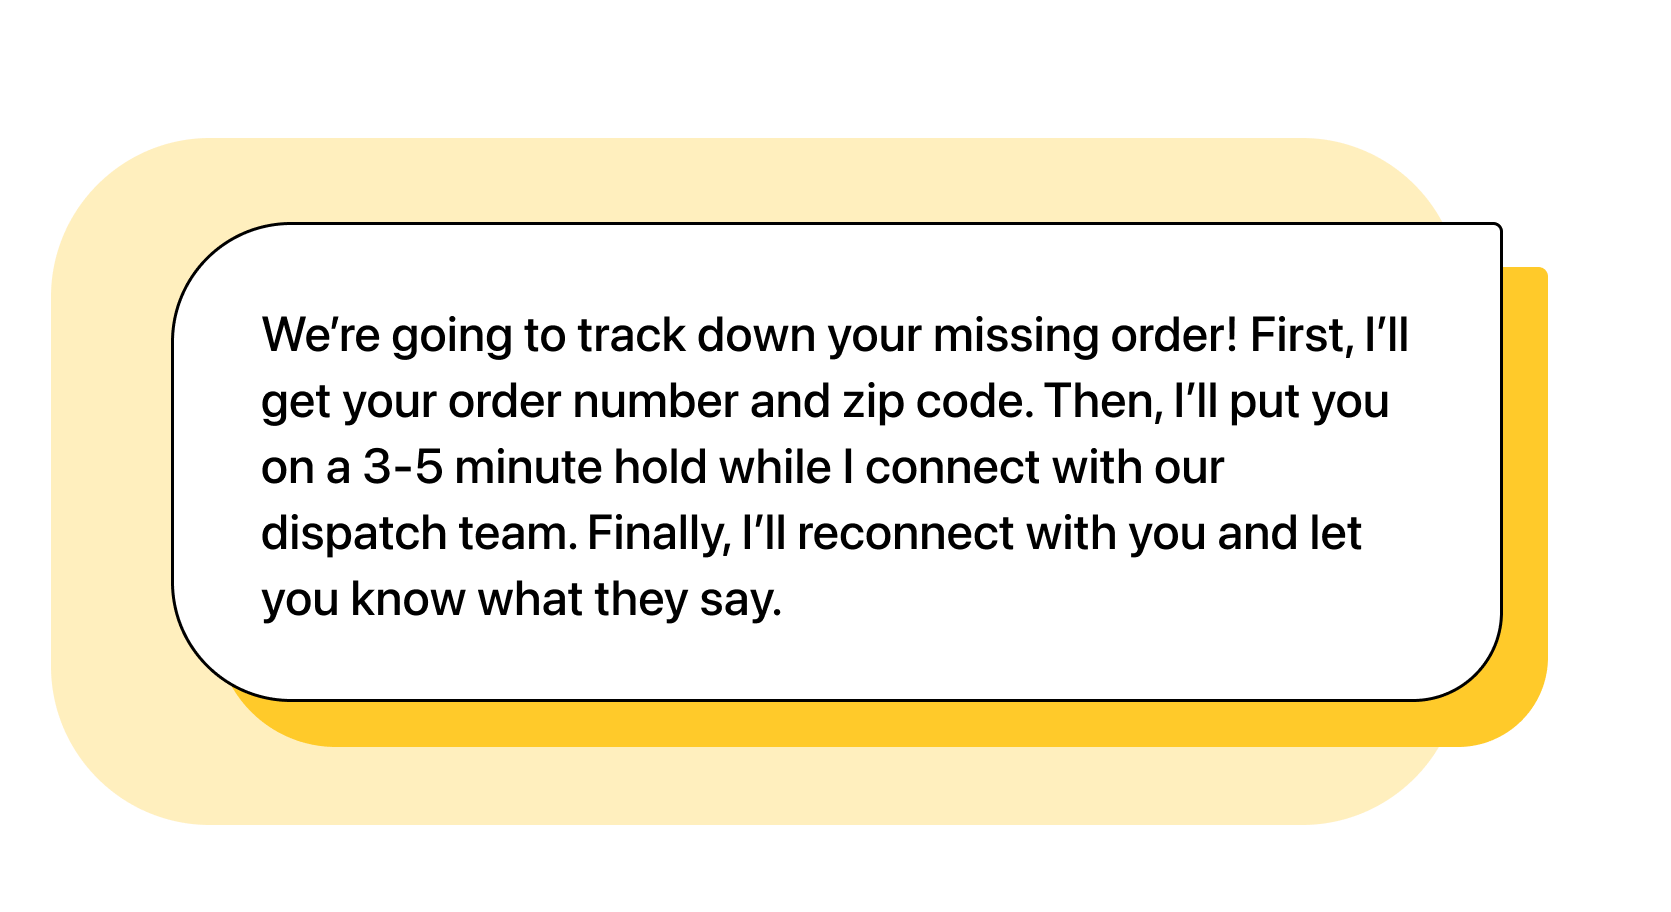 Agent: We’re going to track down your missing order! First, I’ll get your order number and zip code. Then, I’ll put you on a 3-5 minute hold while I connect with our dispatch team. Finally, I’ll reconnect with you and let you know what they say.